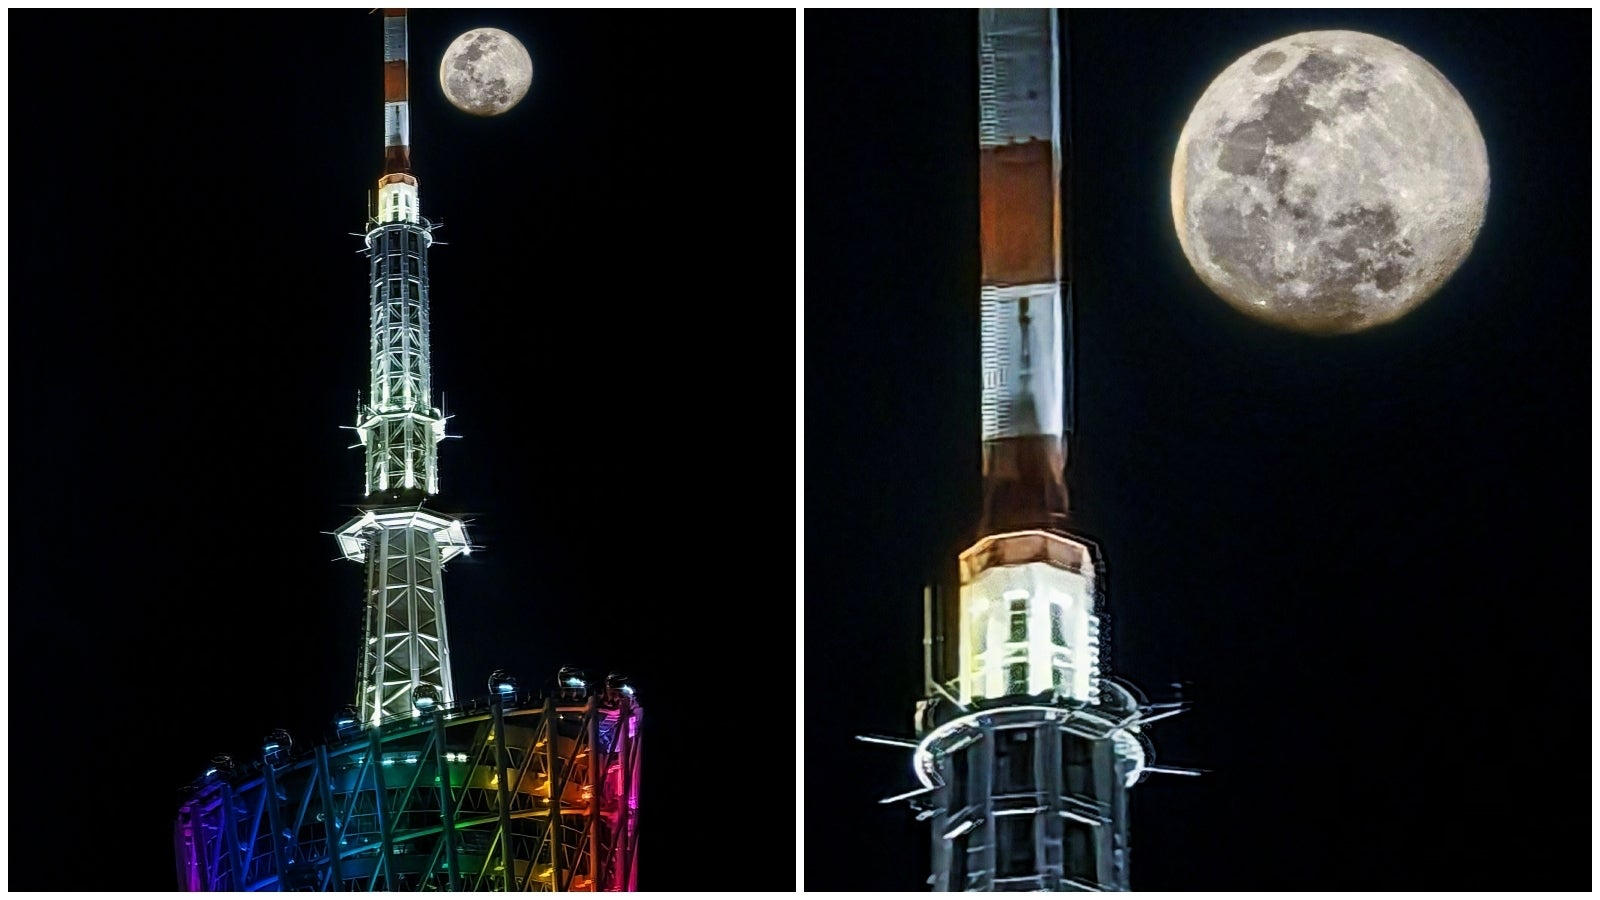 The Huawei P60 Pro might reclaim the company's crown as the best Moon Shot-taker. But how fake is fake enough? - Concluded: Samsung phones take “artificial” moon photos but Samsung has nothing to apologize for